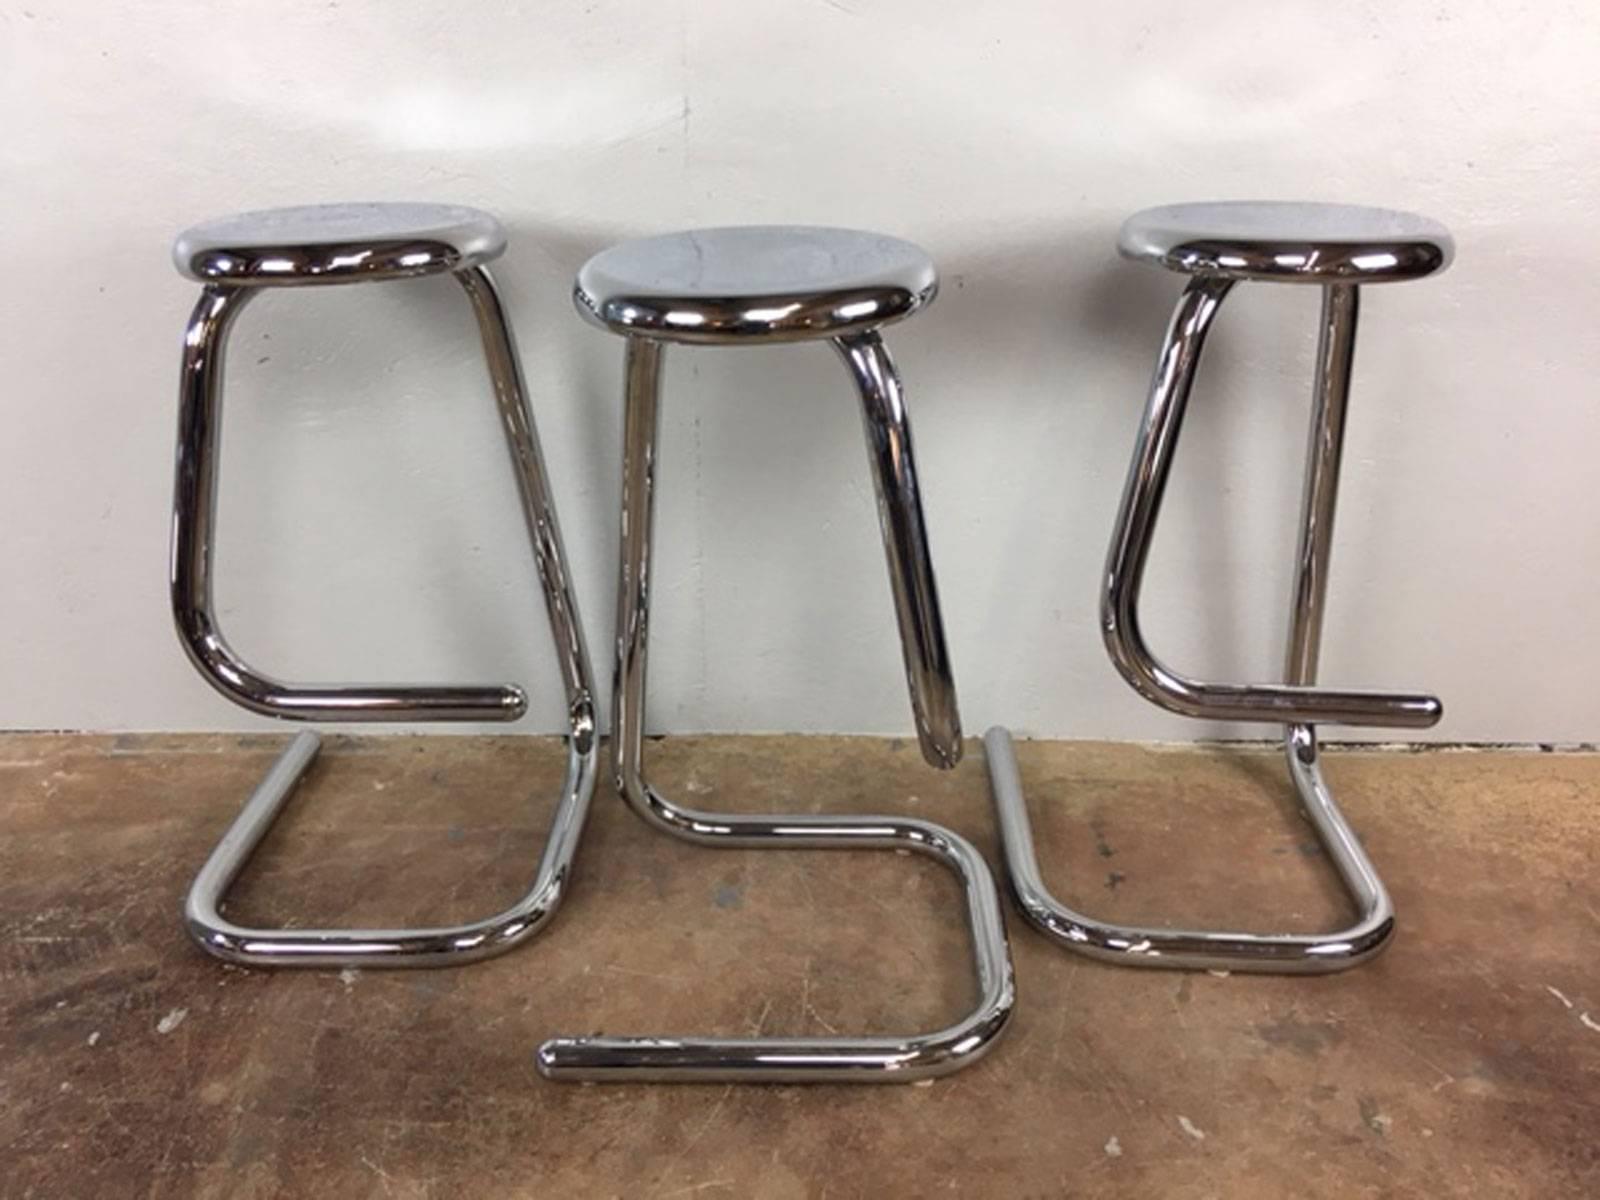 Unique paperclip style bar stool set of three. Stable, sturdy, and durable, circa 1970s. 

Measures: Seat height is 27.5 inches and seat diameter is 12 inches.